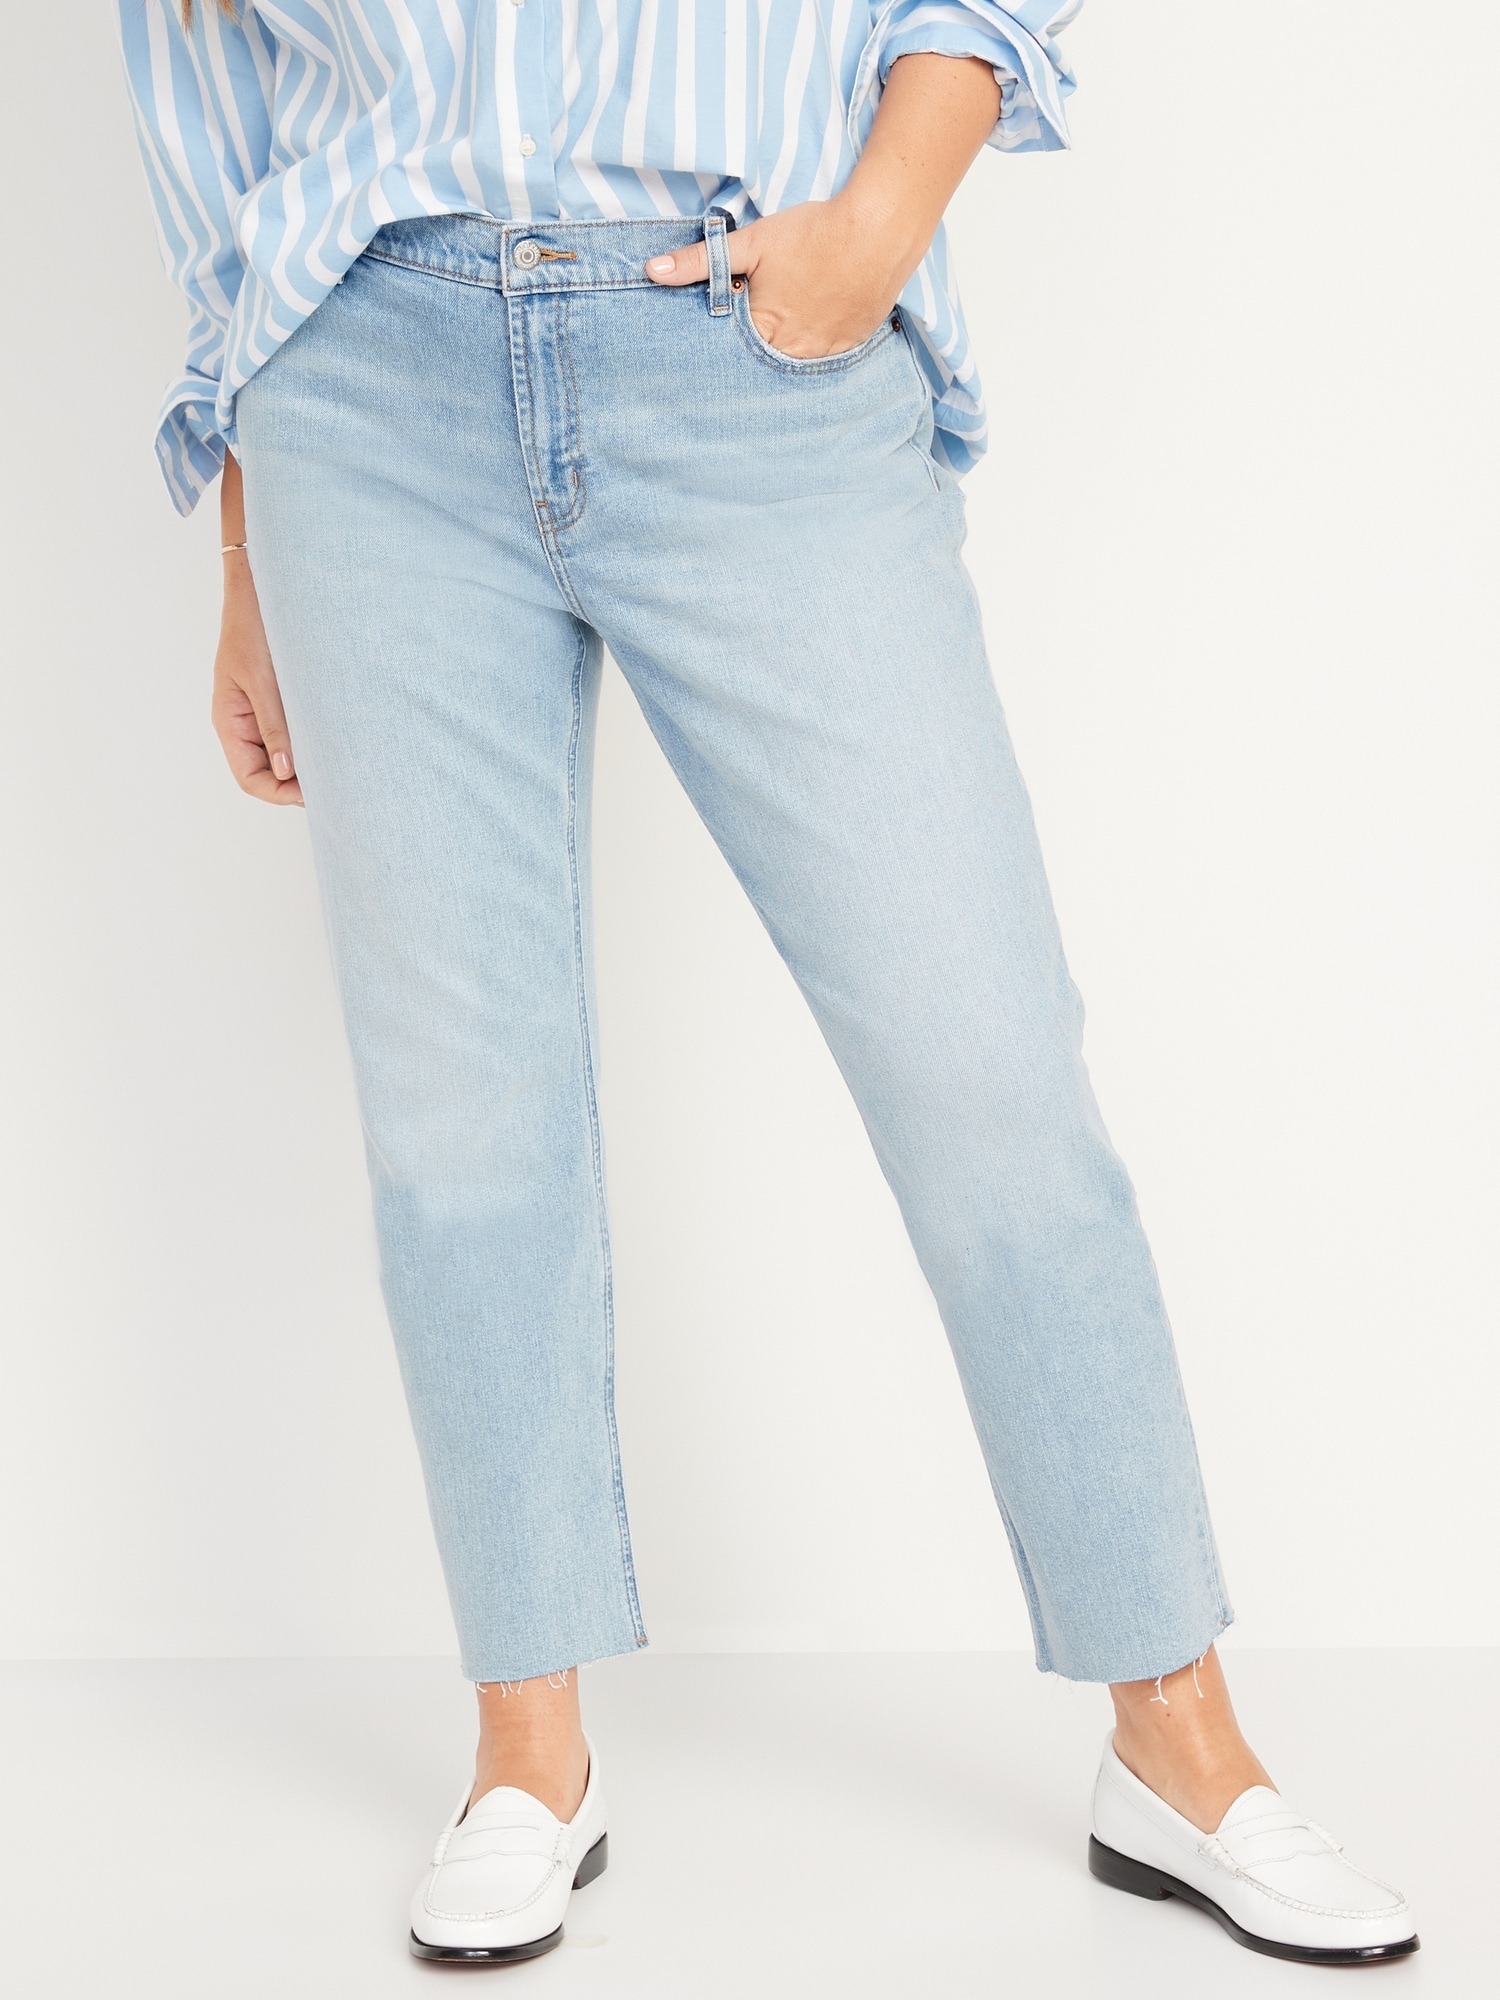 Low-Rise Boyfriend Straight Cut-Off Jeans for Women | Old Navy